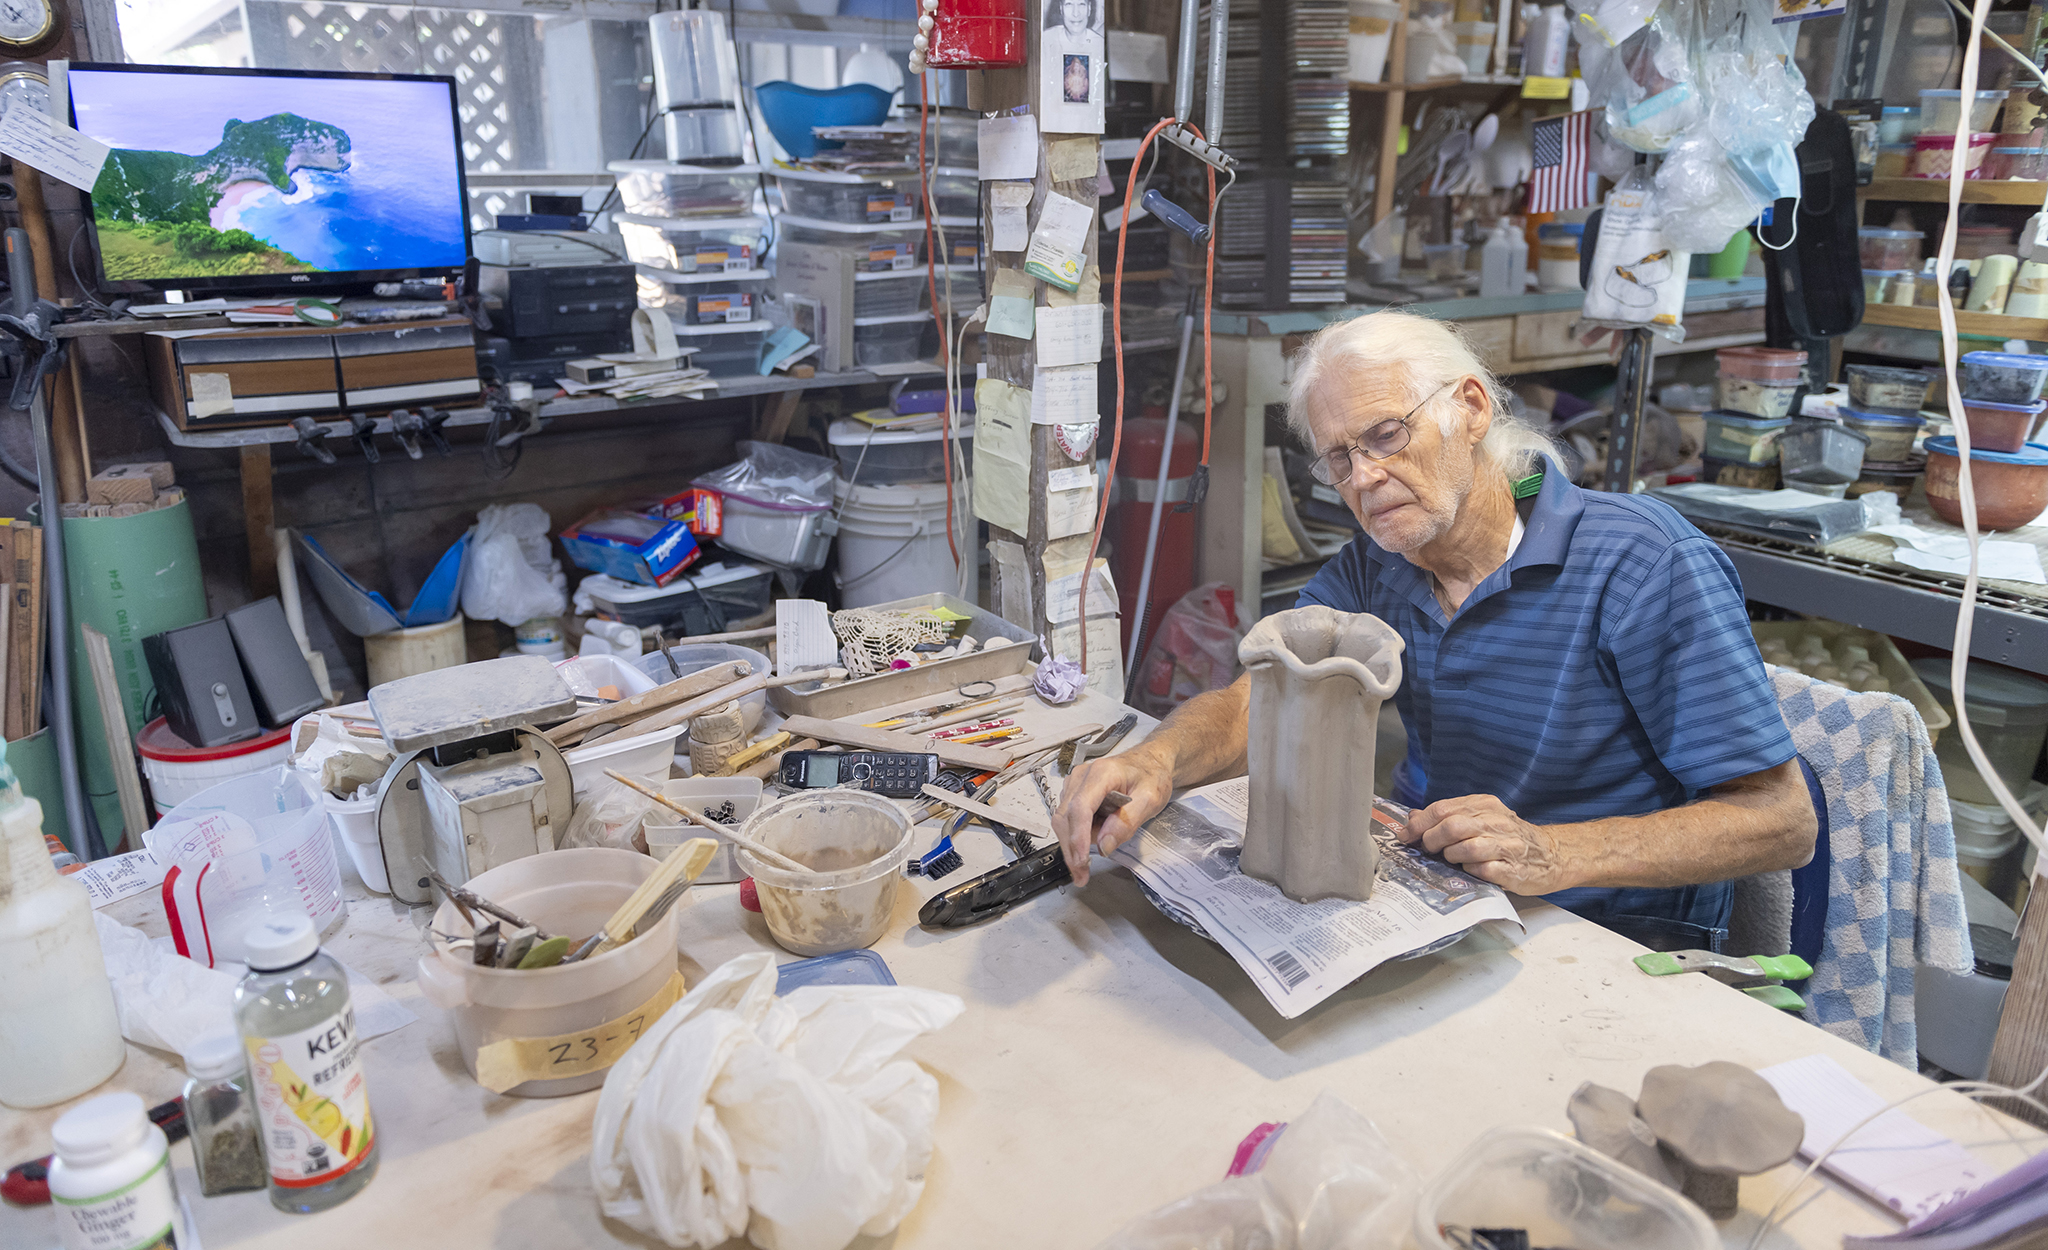 Robert Pickenpaugh works in his studio at Pickenpaugh Pottery & Gallery. Photo by Srijita Chattopadhyay/Ole Miss Digital Imaging Services